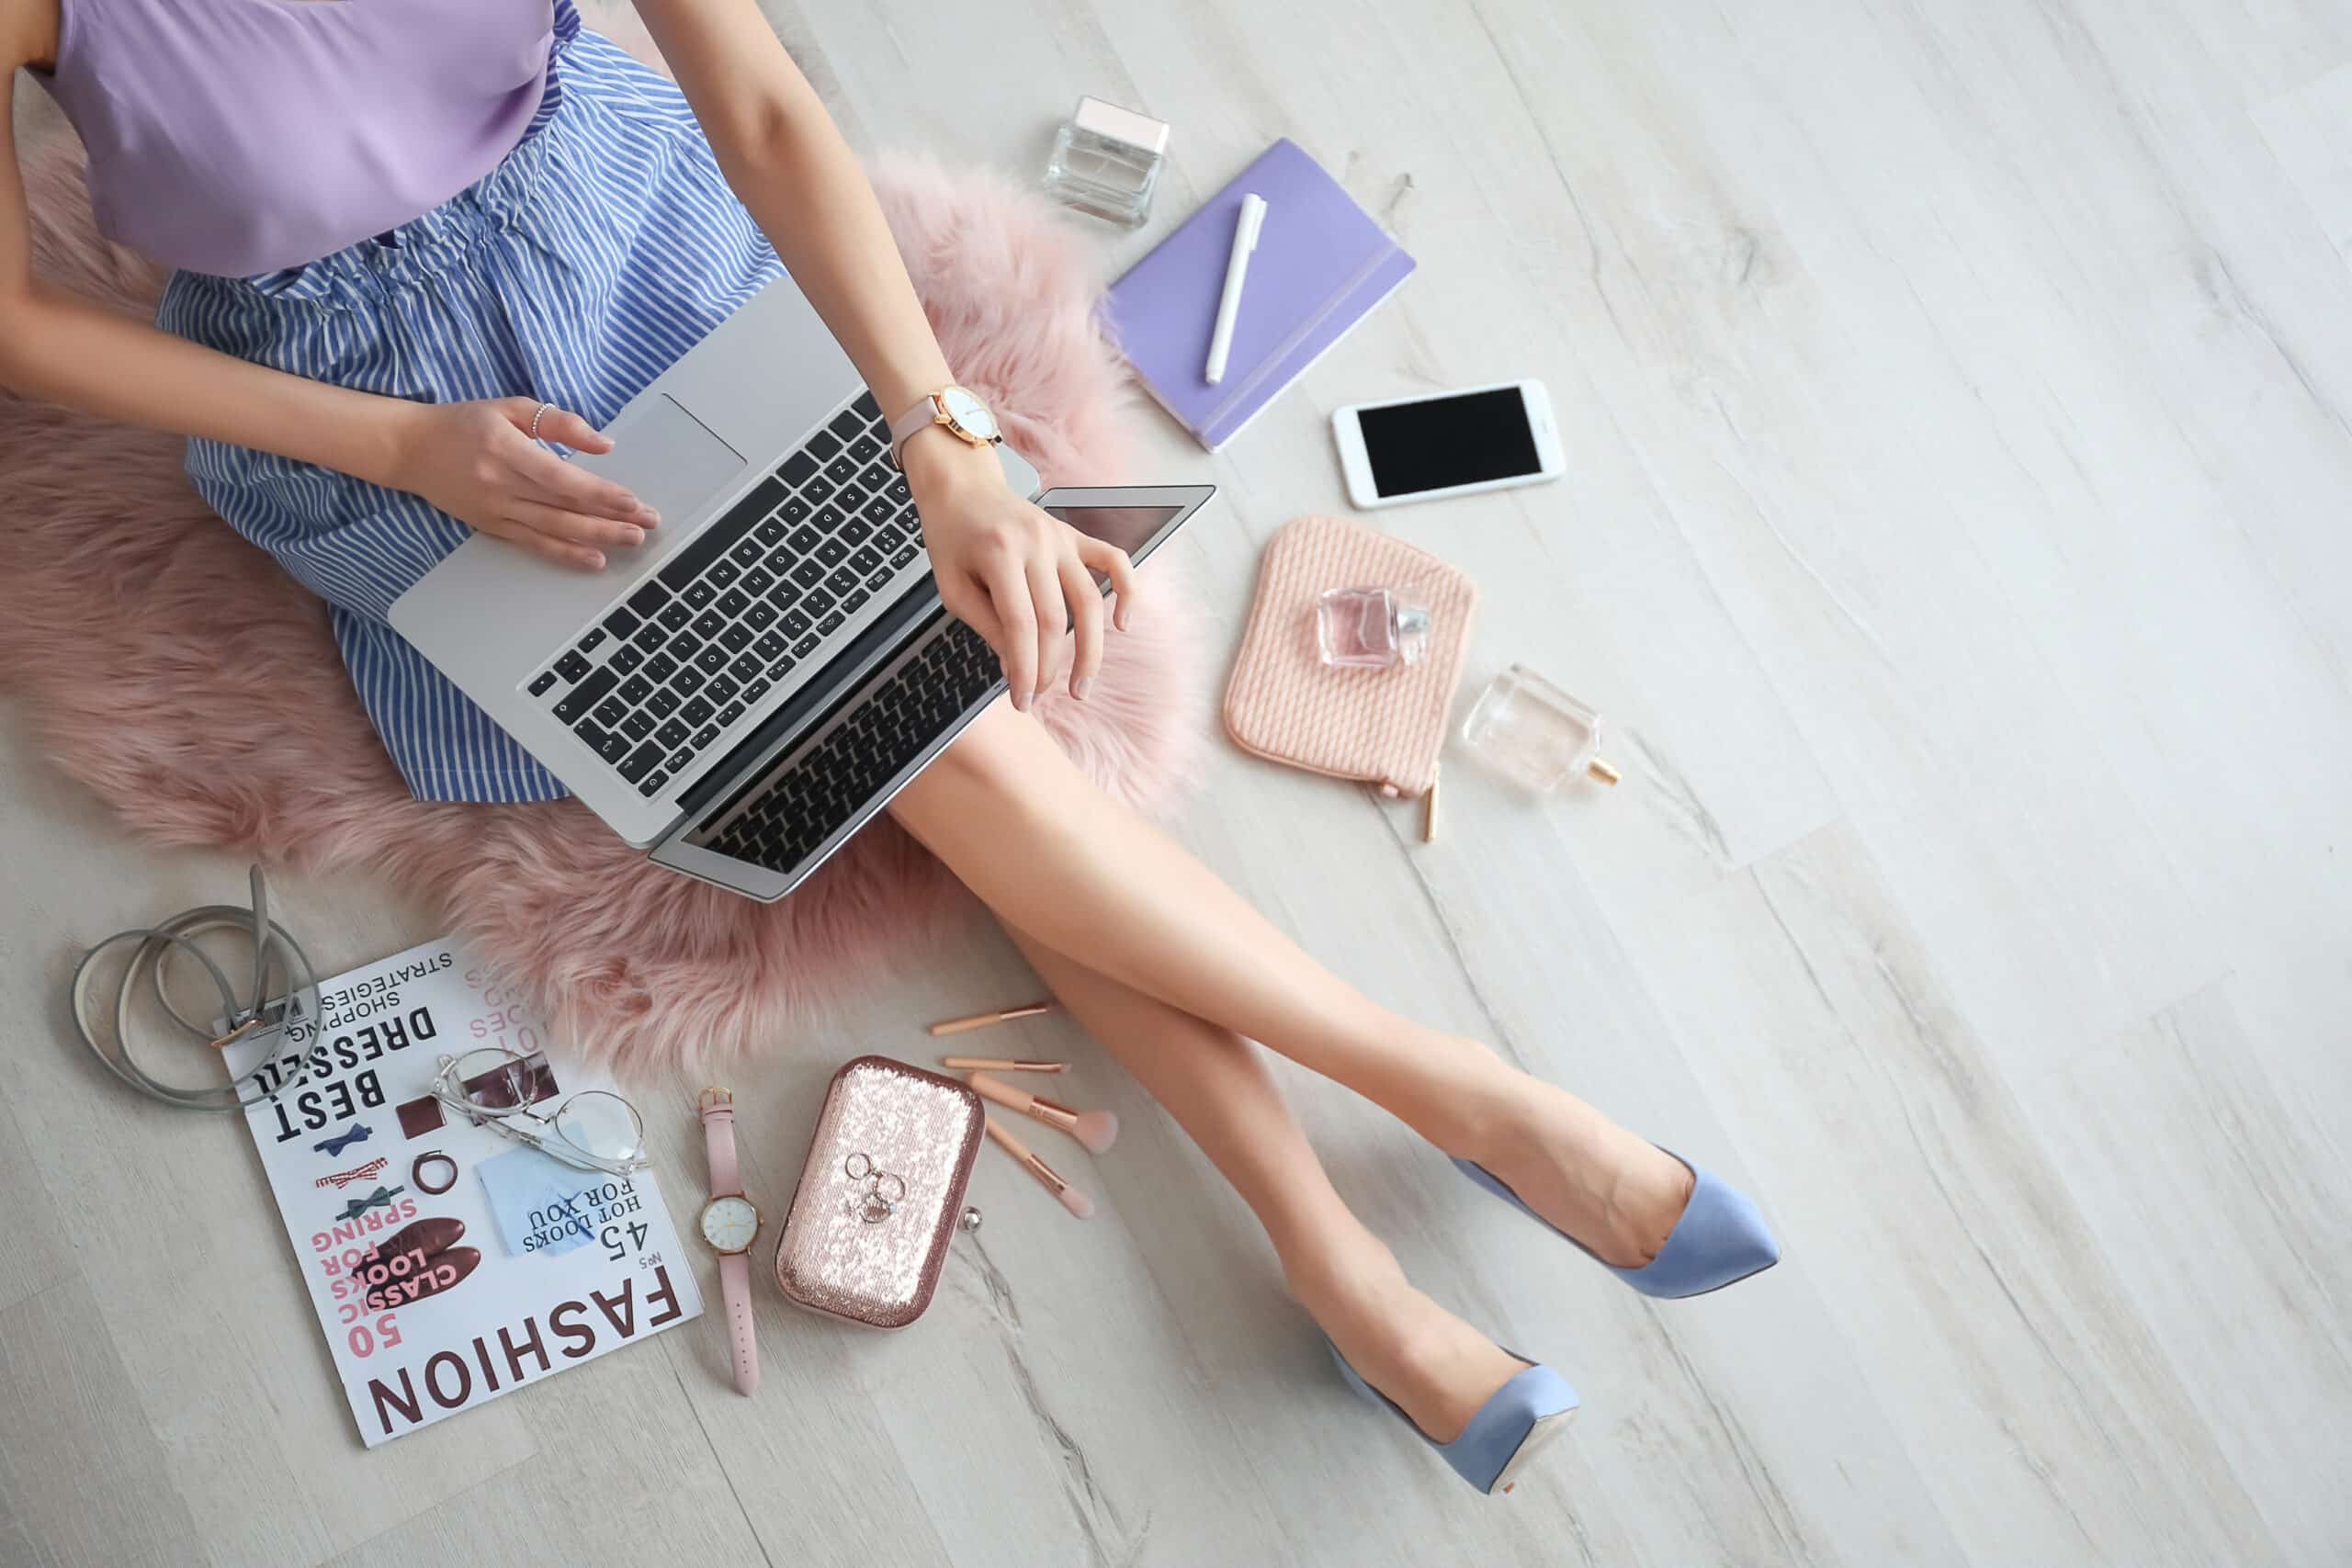 Female beauty blogger with laptop indoors, top view